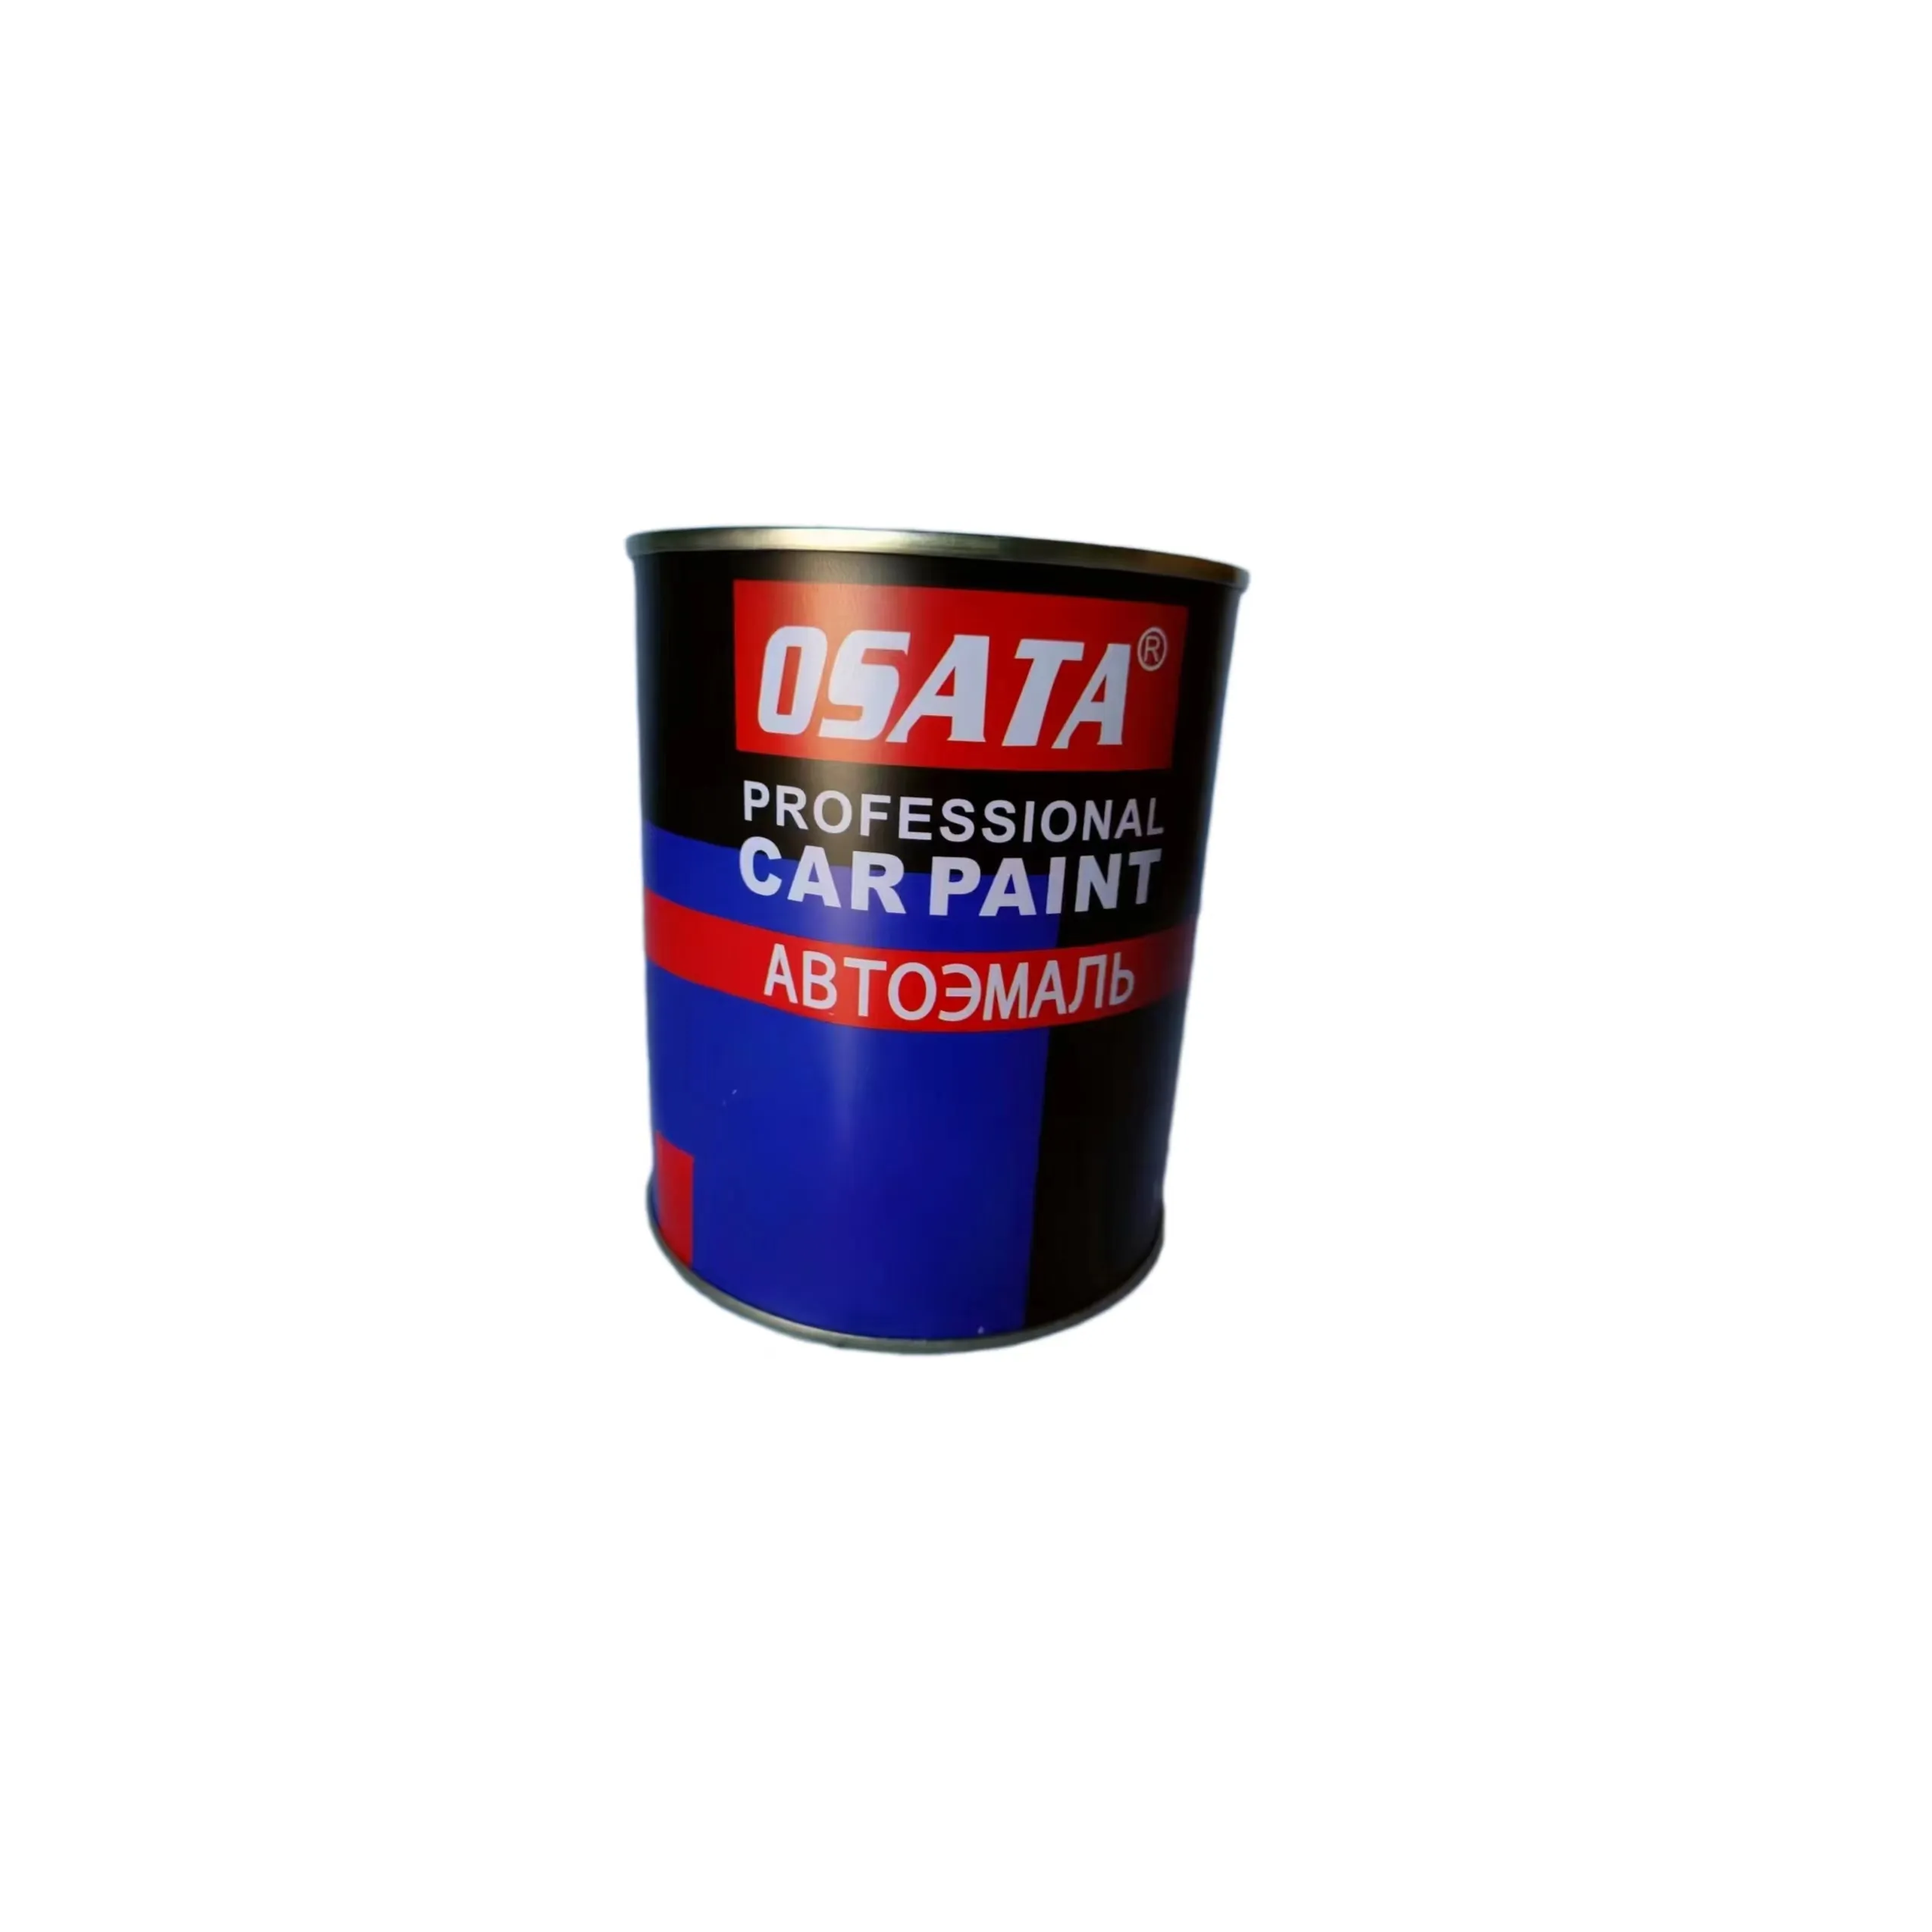 Automotive Finishes Factory Price Car Paint Colors High Performance Coatings base top coat cao cap